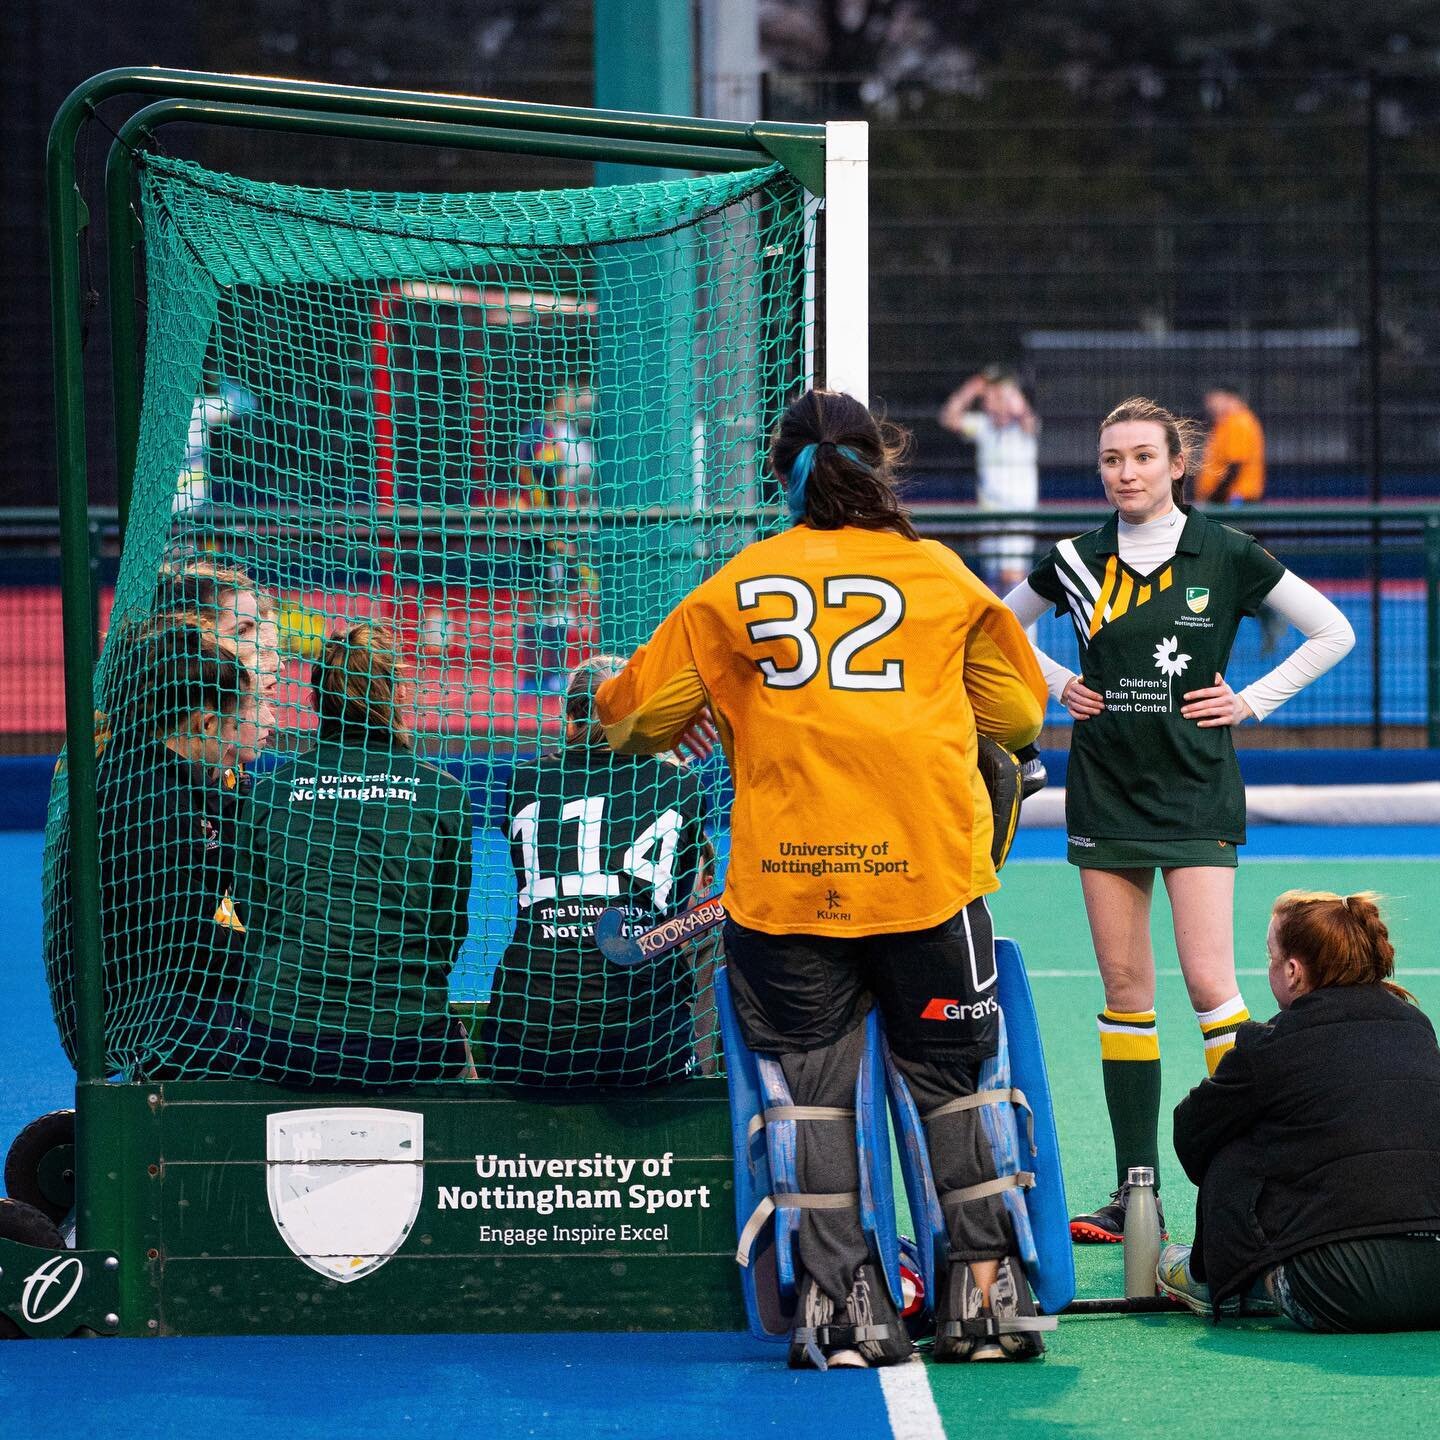 Highlights from the L7s game against South Nottingham 1s a couple of weekends ago🏑 

5-0 win🔥 #goaltime 

📸: @kaiharperphotography @uonphotosoc